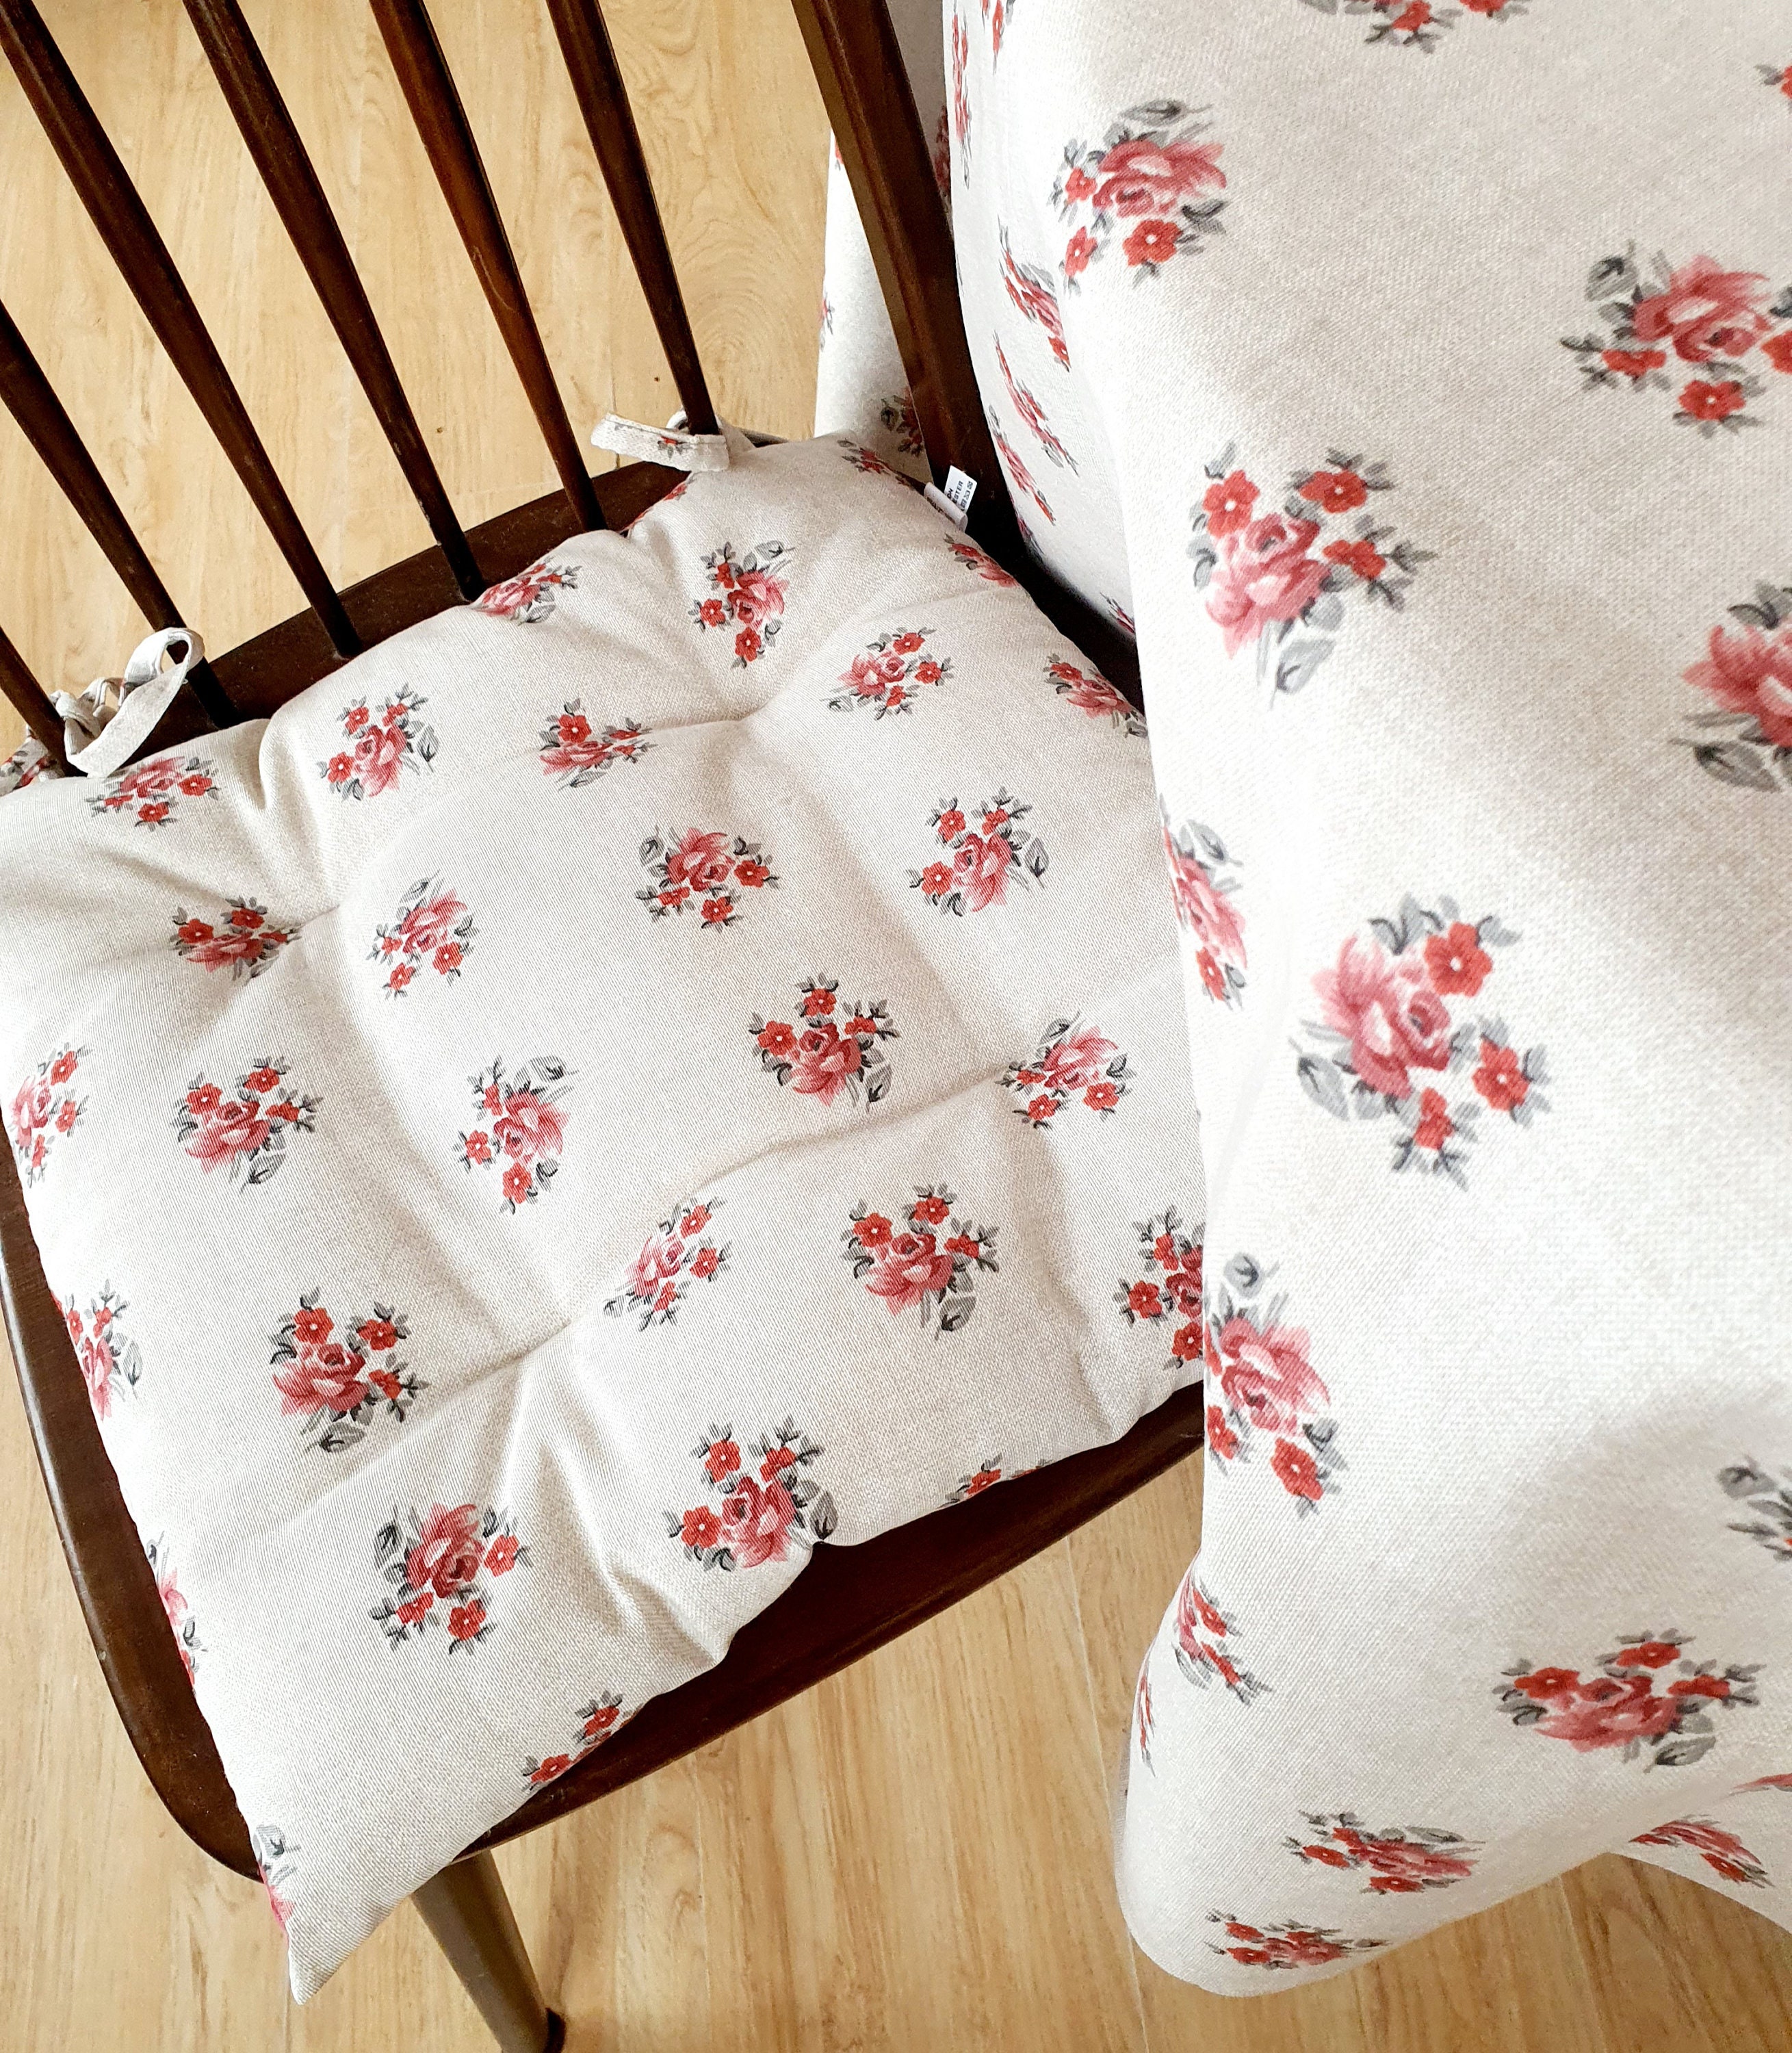 Purple Pink Rose Print Floral Puffy Chair Cushion and Tabletop Set